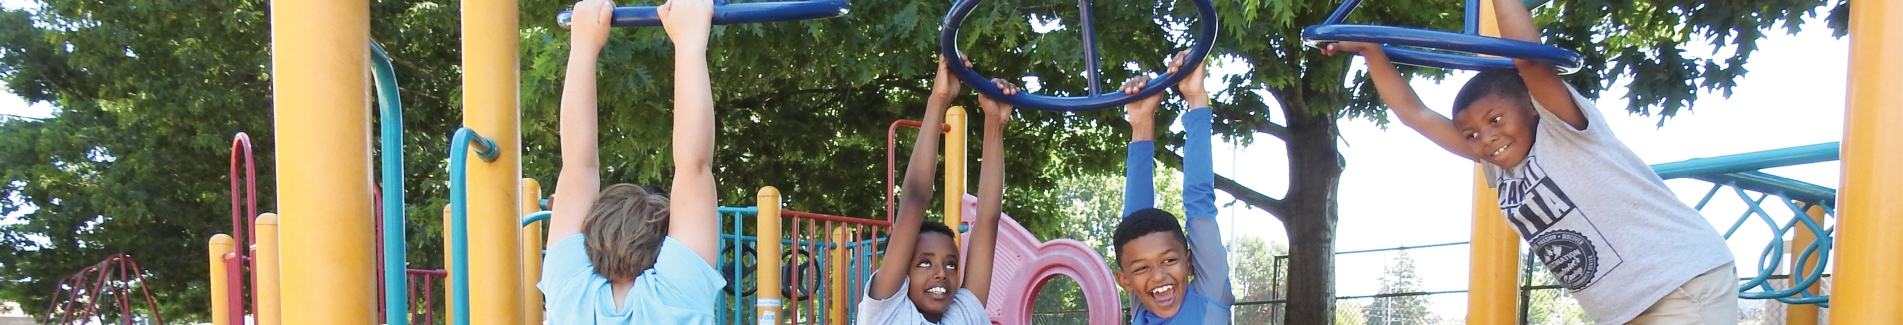 School age children playing on the jungle gym at a playground